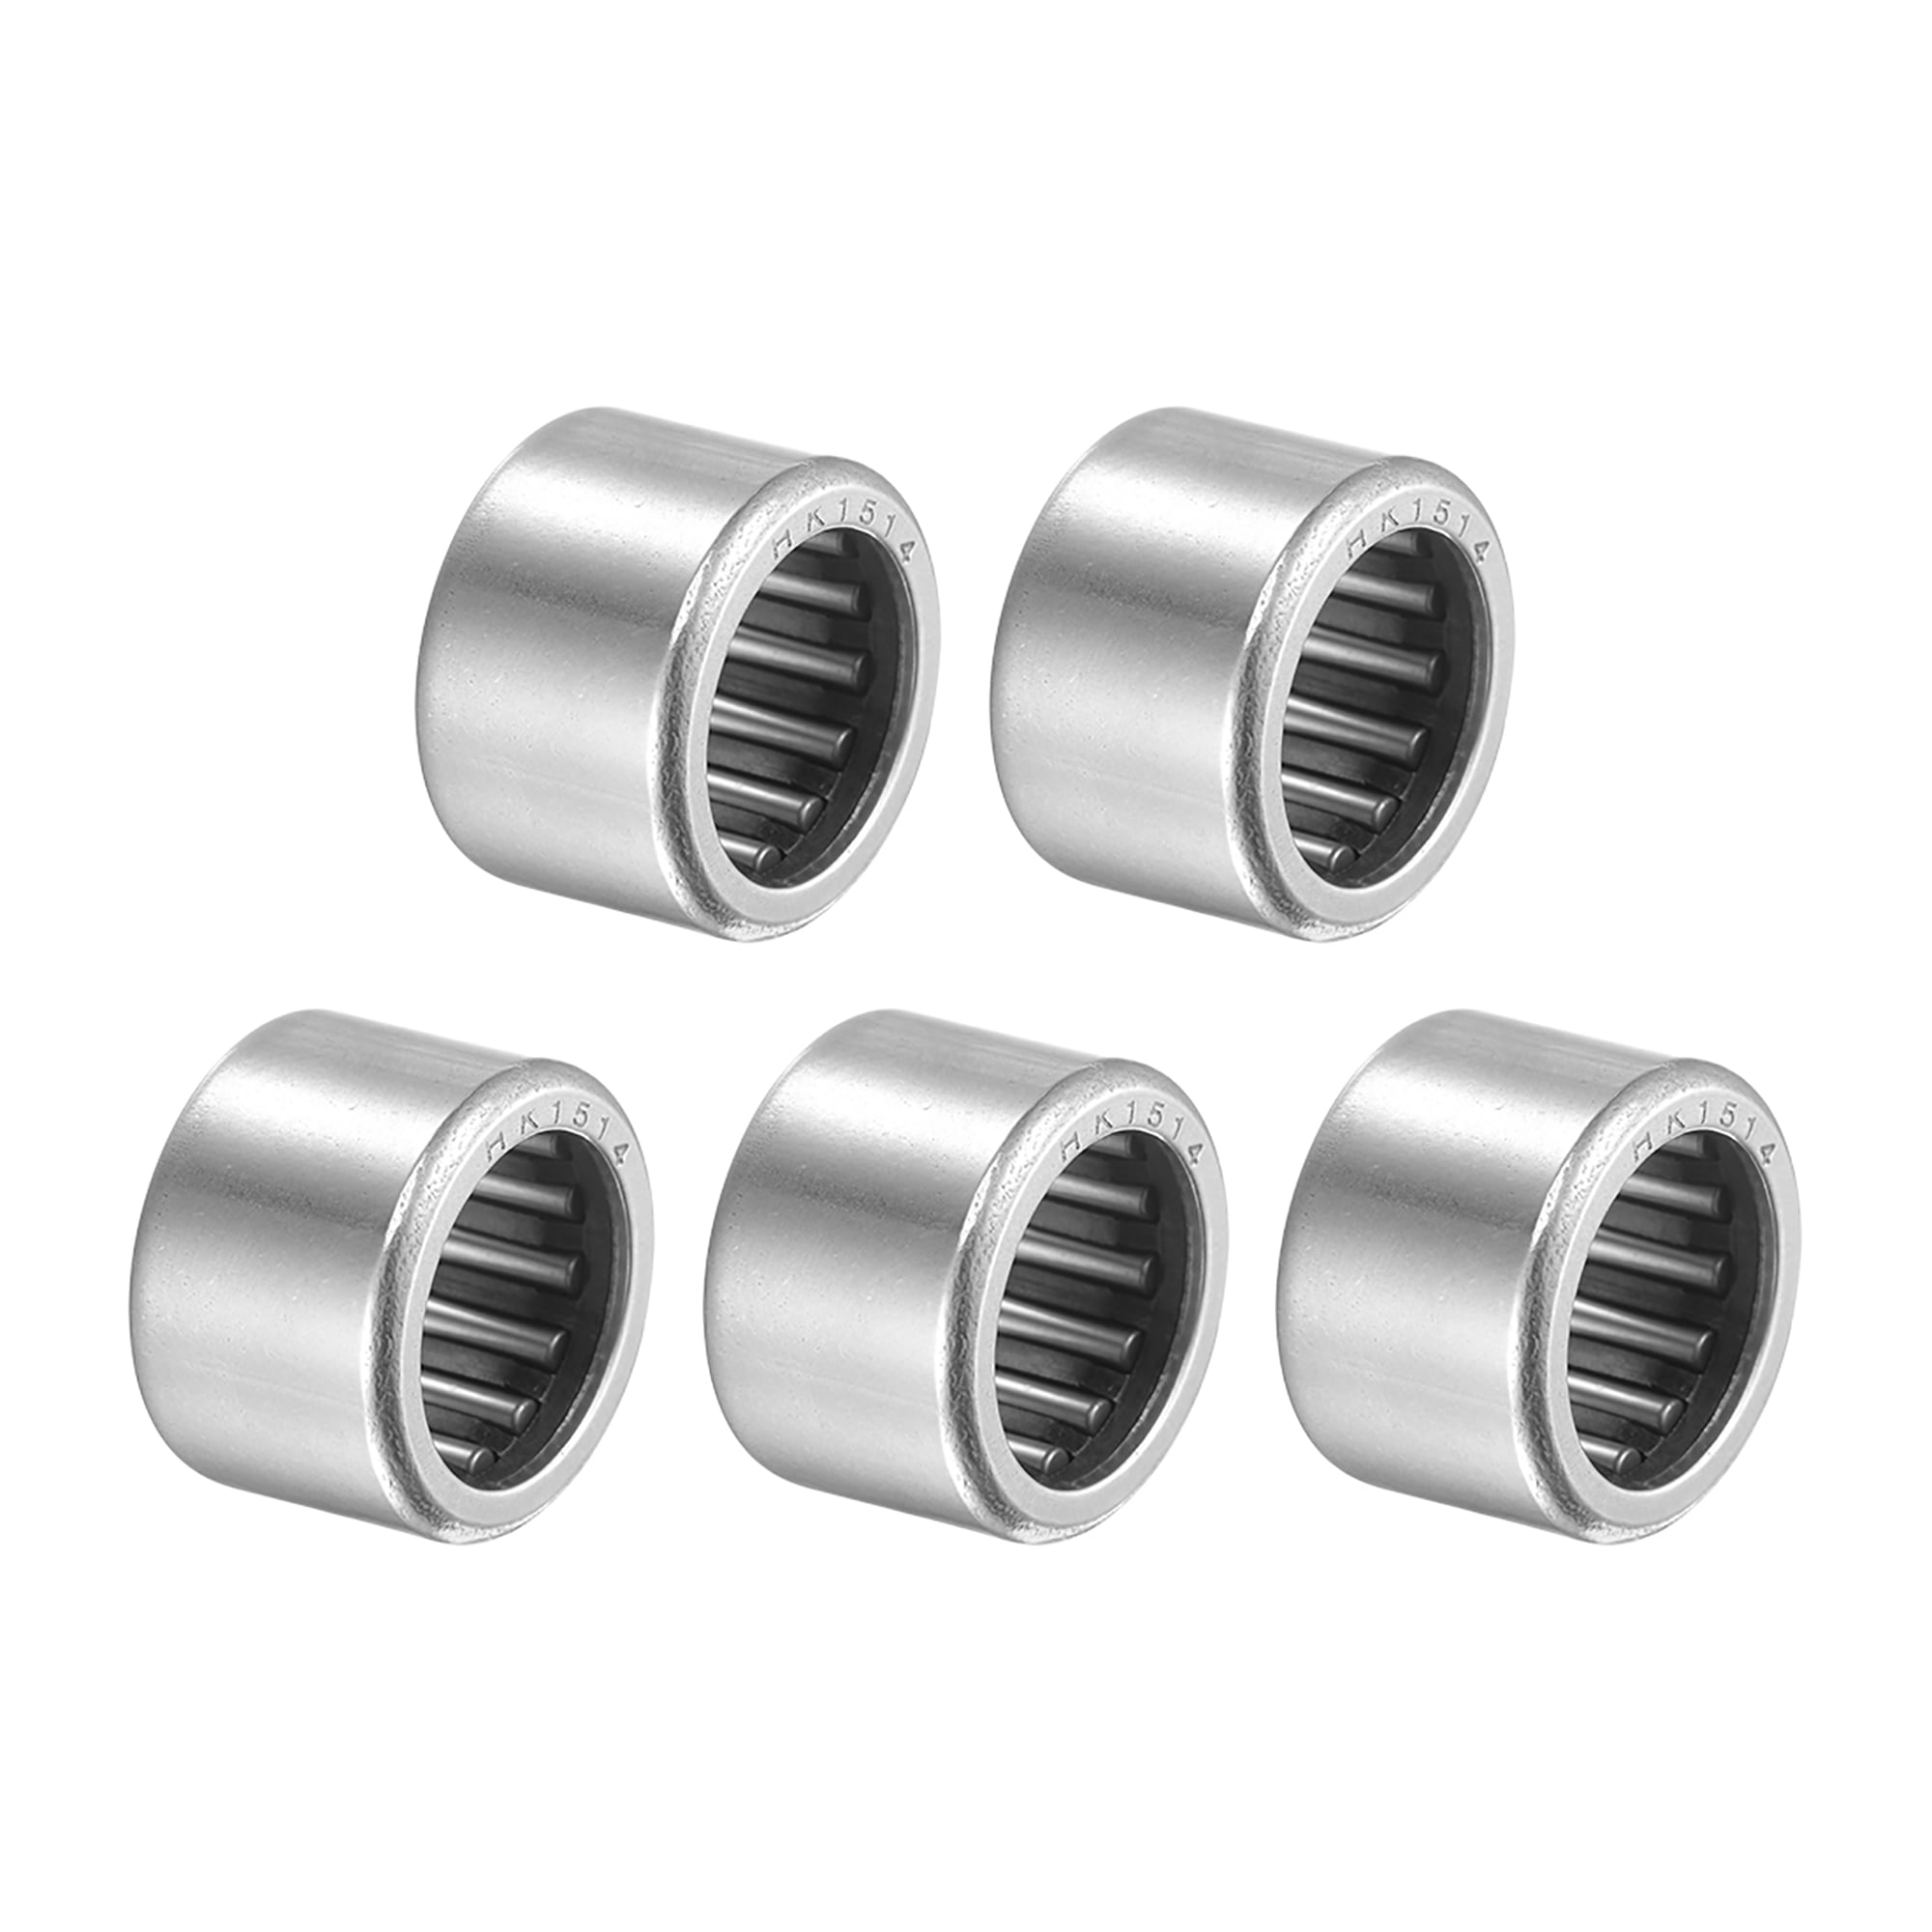 O.D Drawn Cup Needle Roller Bearing Open End 8mm/10mm I.D 12mm/16mm 10pcs 1012 